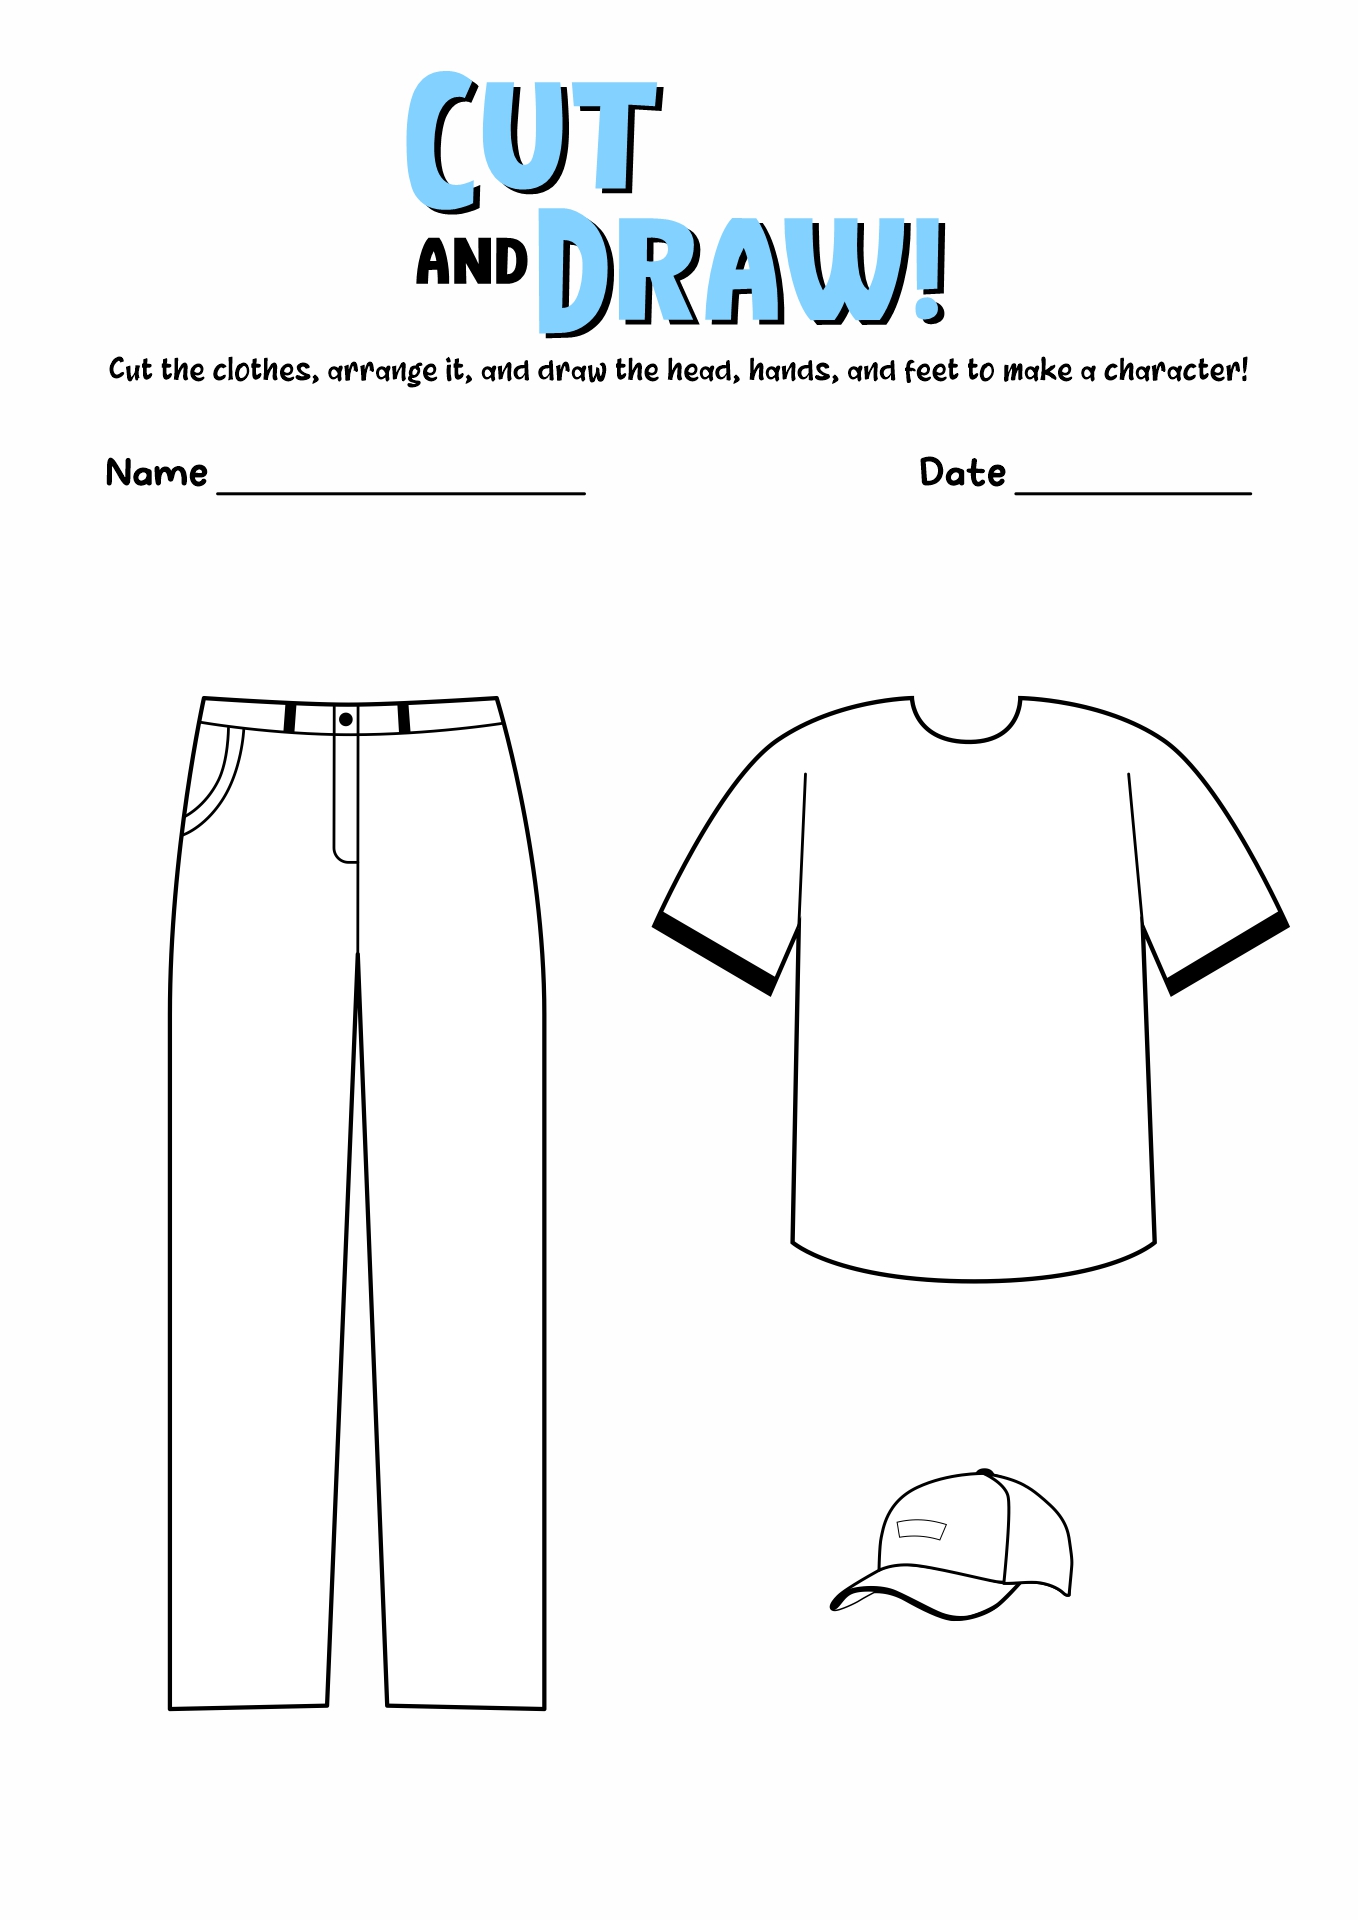 Worksheet For Class Evs Clothes Free Printable Worksheets Hot Sex Picture